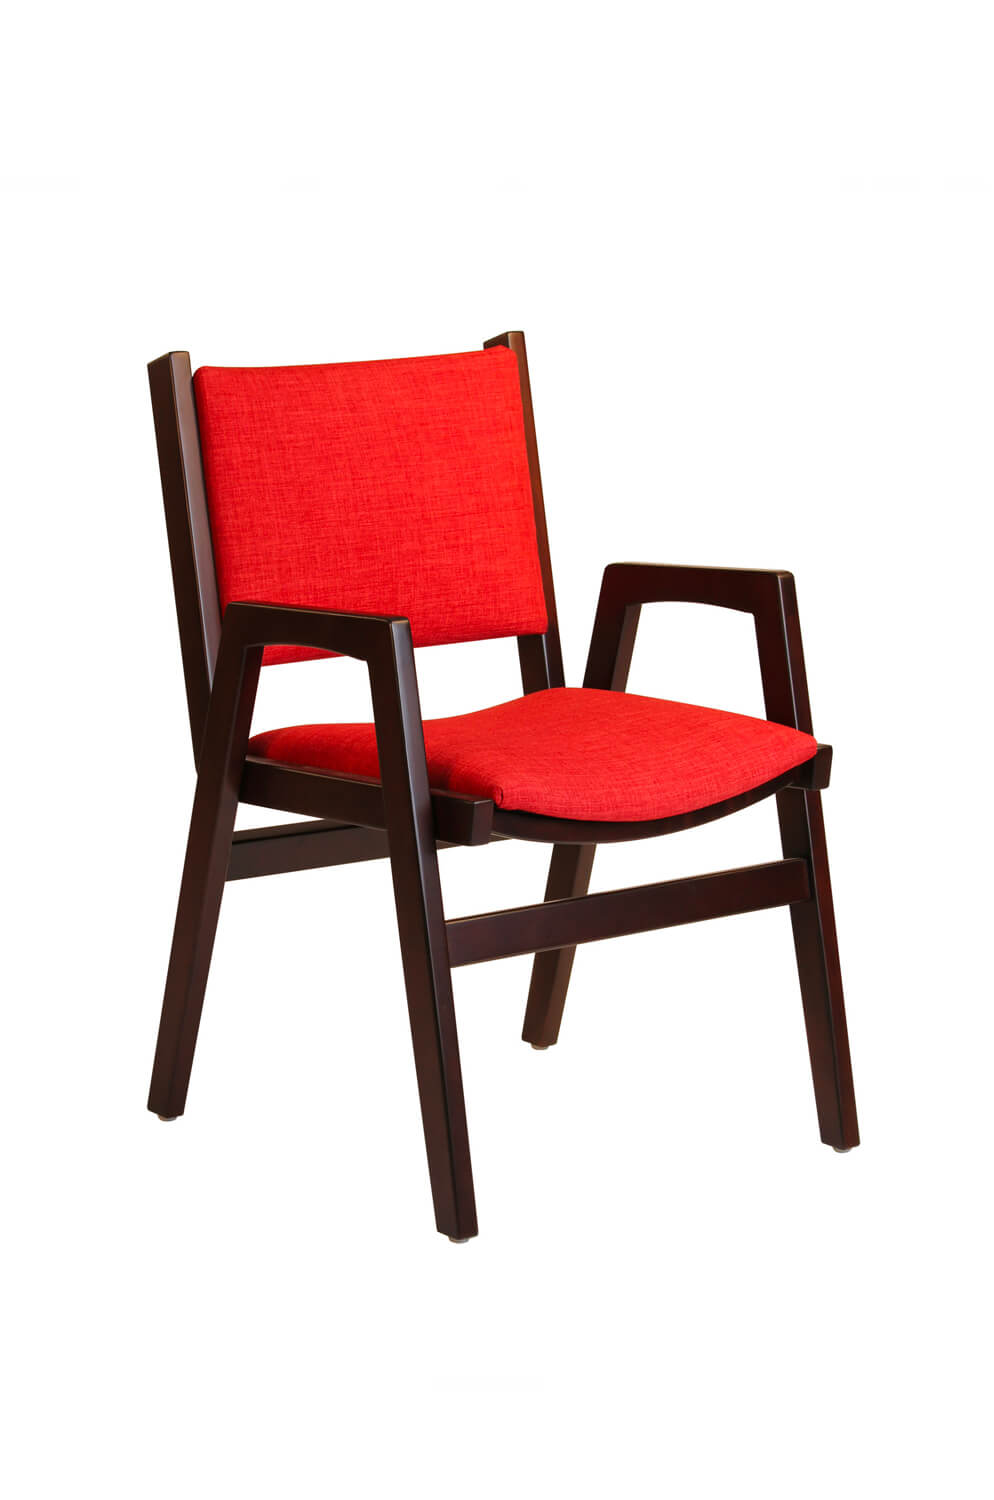 Darafeev's Spencer Upholstered Stacking Wood Arm Chair